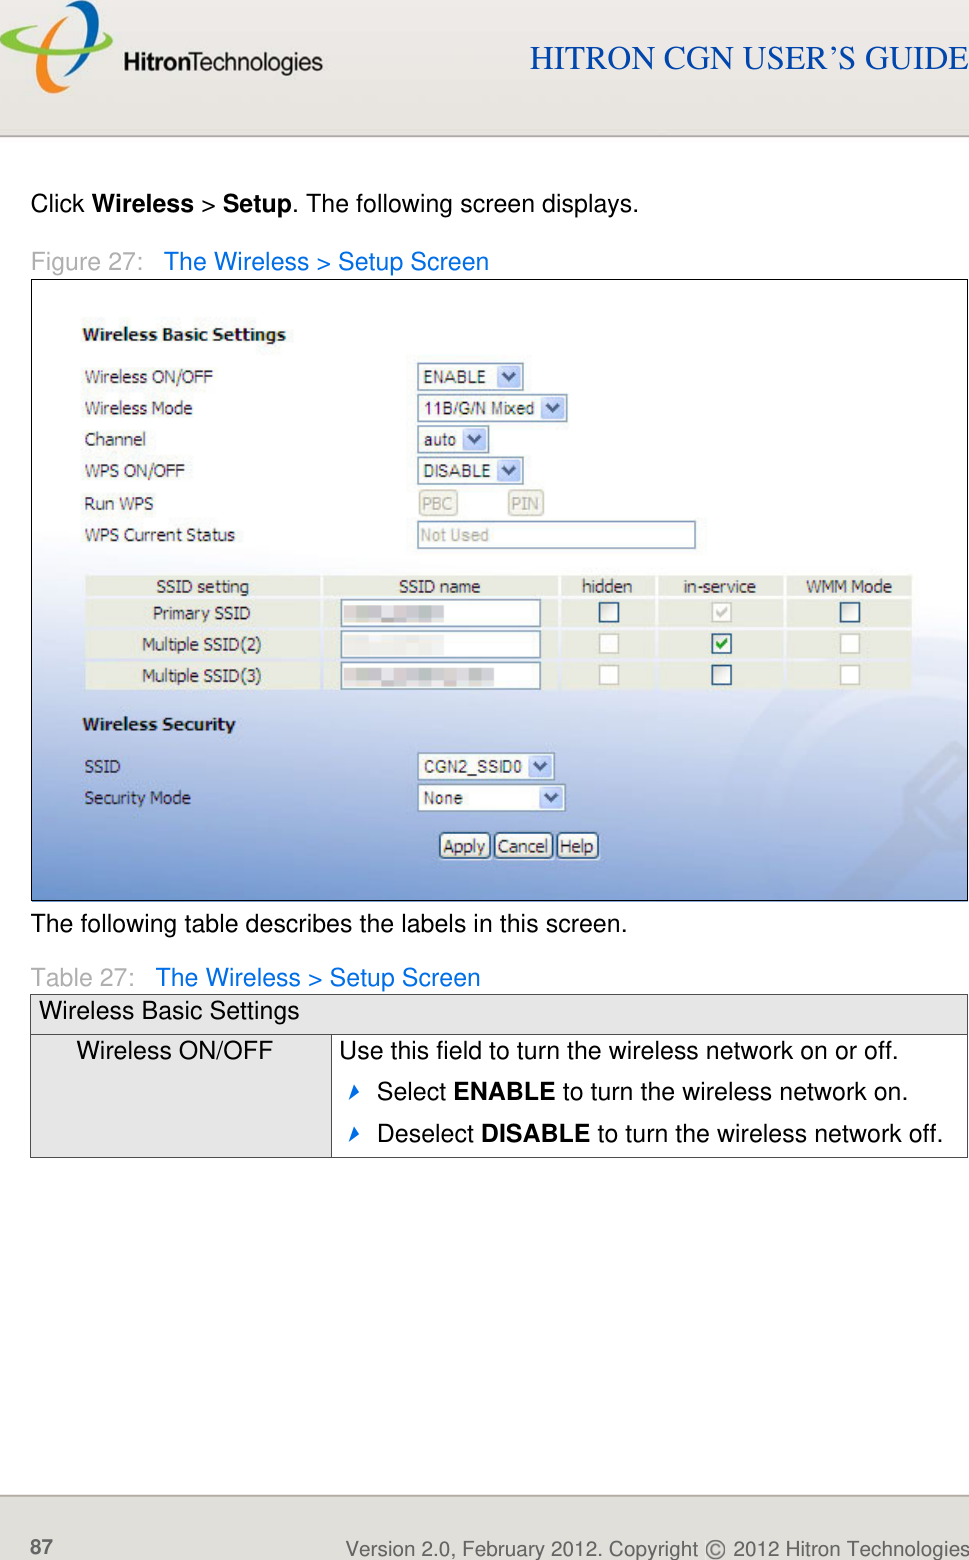 WIRELESSVersion 2.0, February 2012. Copyright   2012 Hitron Technologies87Version 2.0, February 2012. Copyright   2012 Hitron Technologies87HITRON CGN USER’S GUIDEClick Wireless &gt; Setup. The following screen displays.Figure 27:   The Wireless &gt; Setup ScreenThe following table describes the labels in this screen.Table 27:   The Wireless &gt; Setup ScreenWireless Basic SettingsWireless ON/OFF Use this field to turn the wireless network on or off.Select ENABLE to turn the wireless network on.Deselect DISABLE to turn the wireless network off.